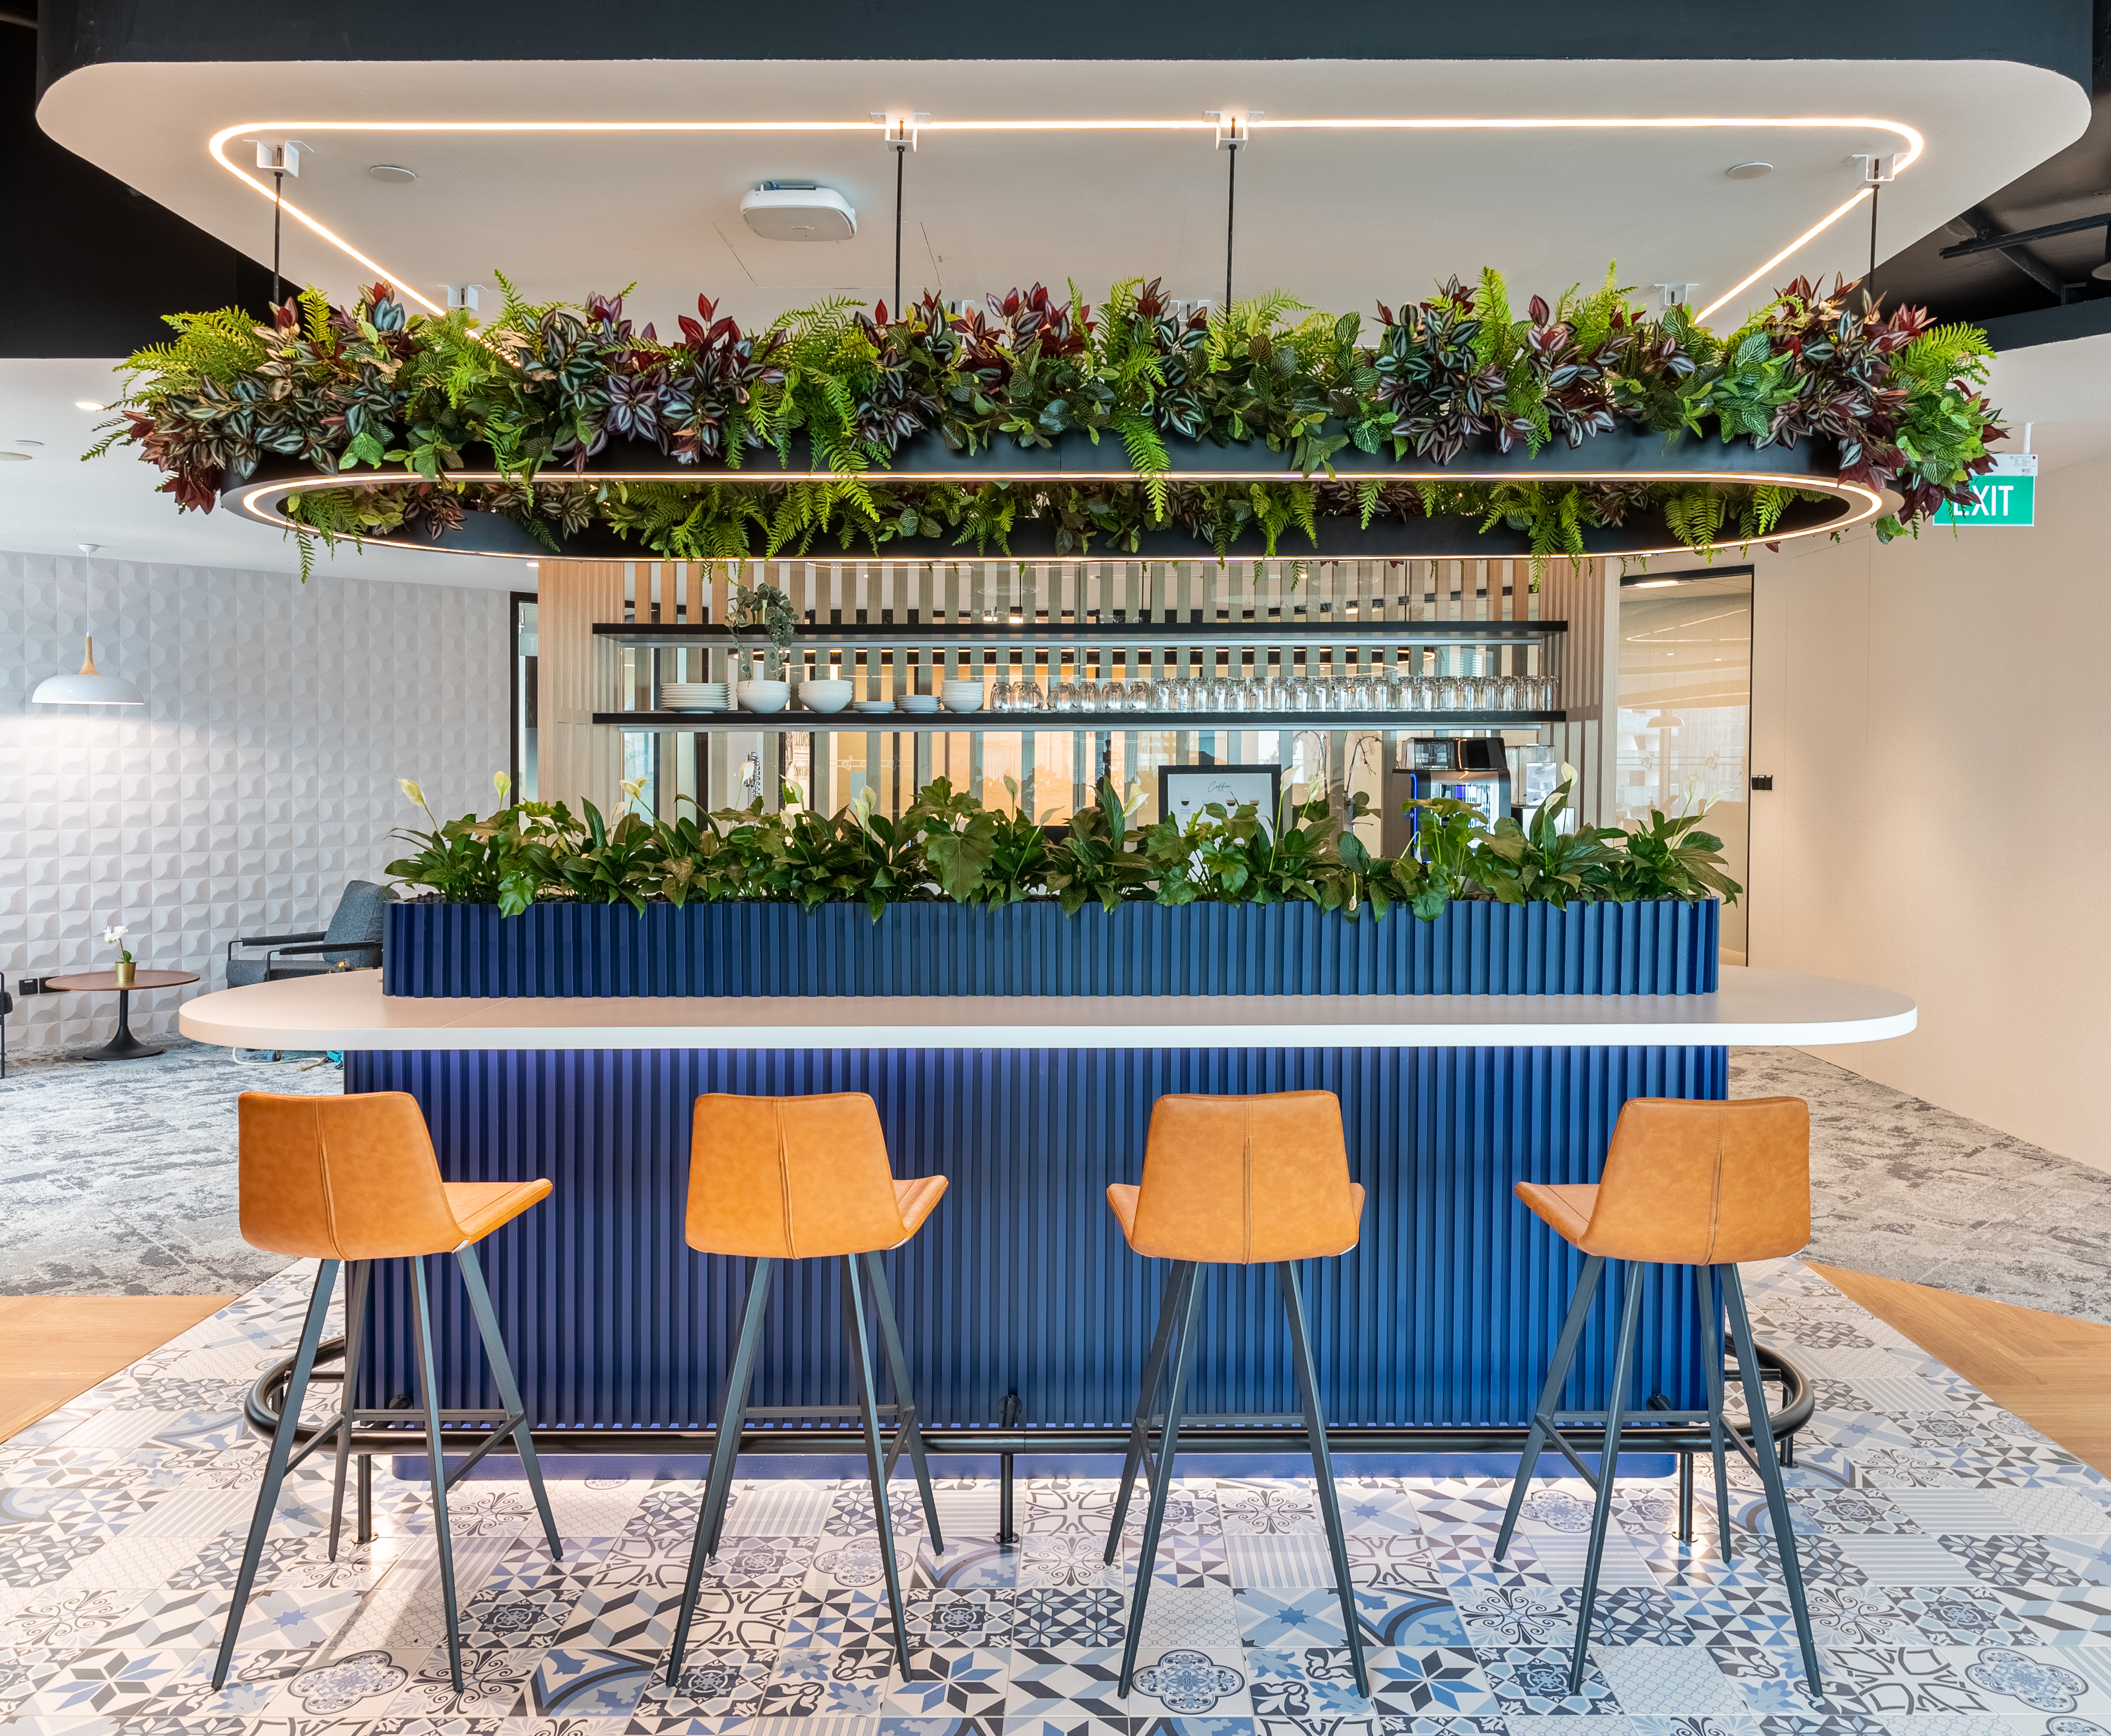 Space Matrix designed a chic pantry that mirrors the buzzing vibe of a coworking space